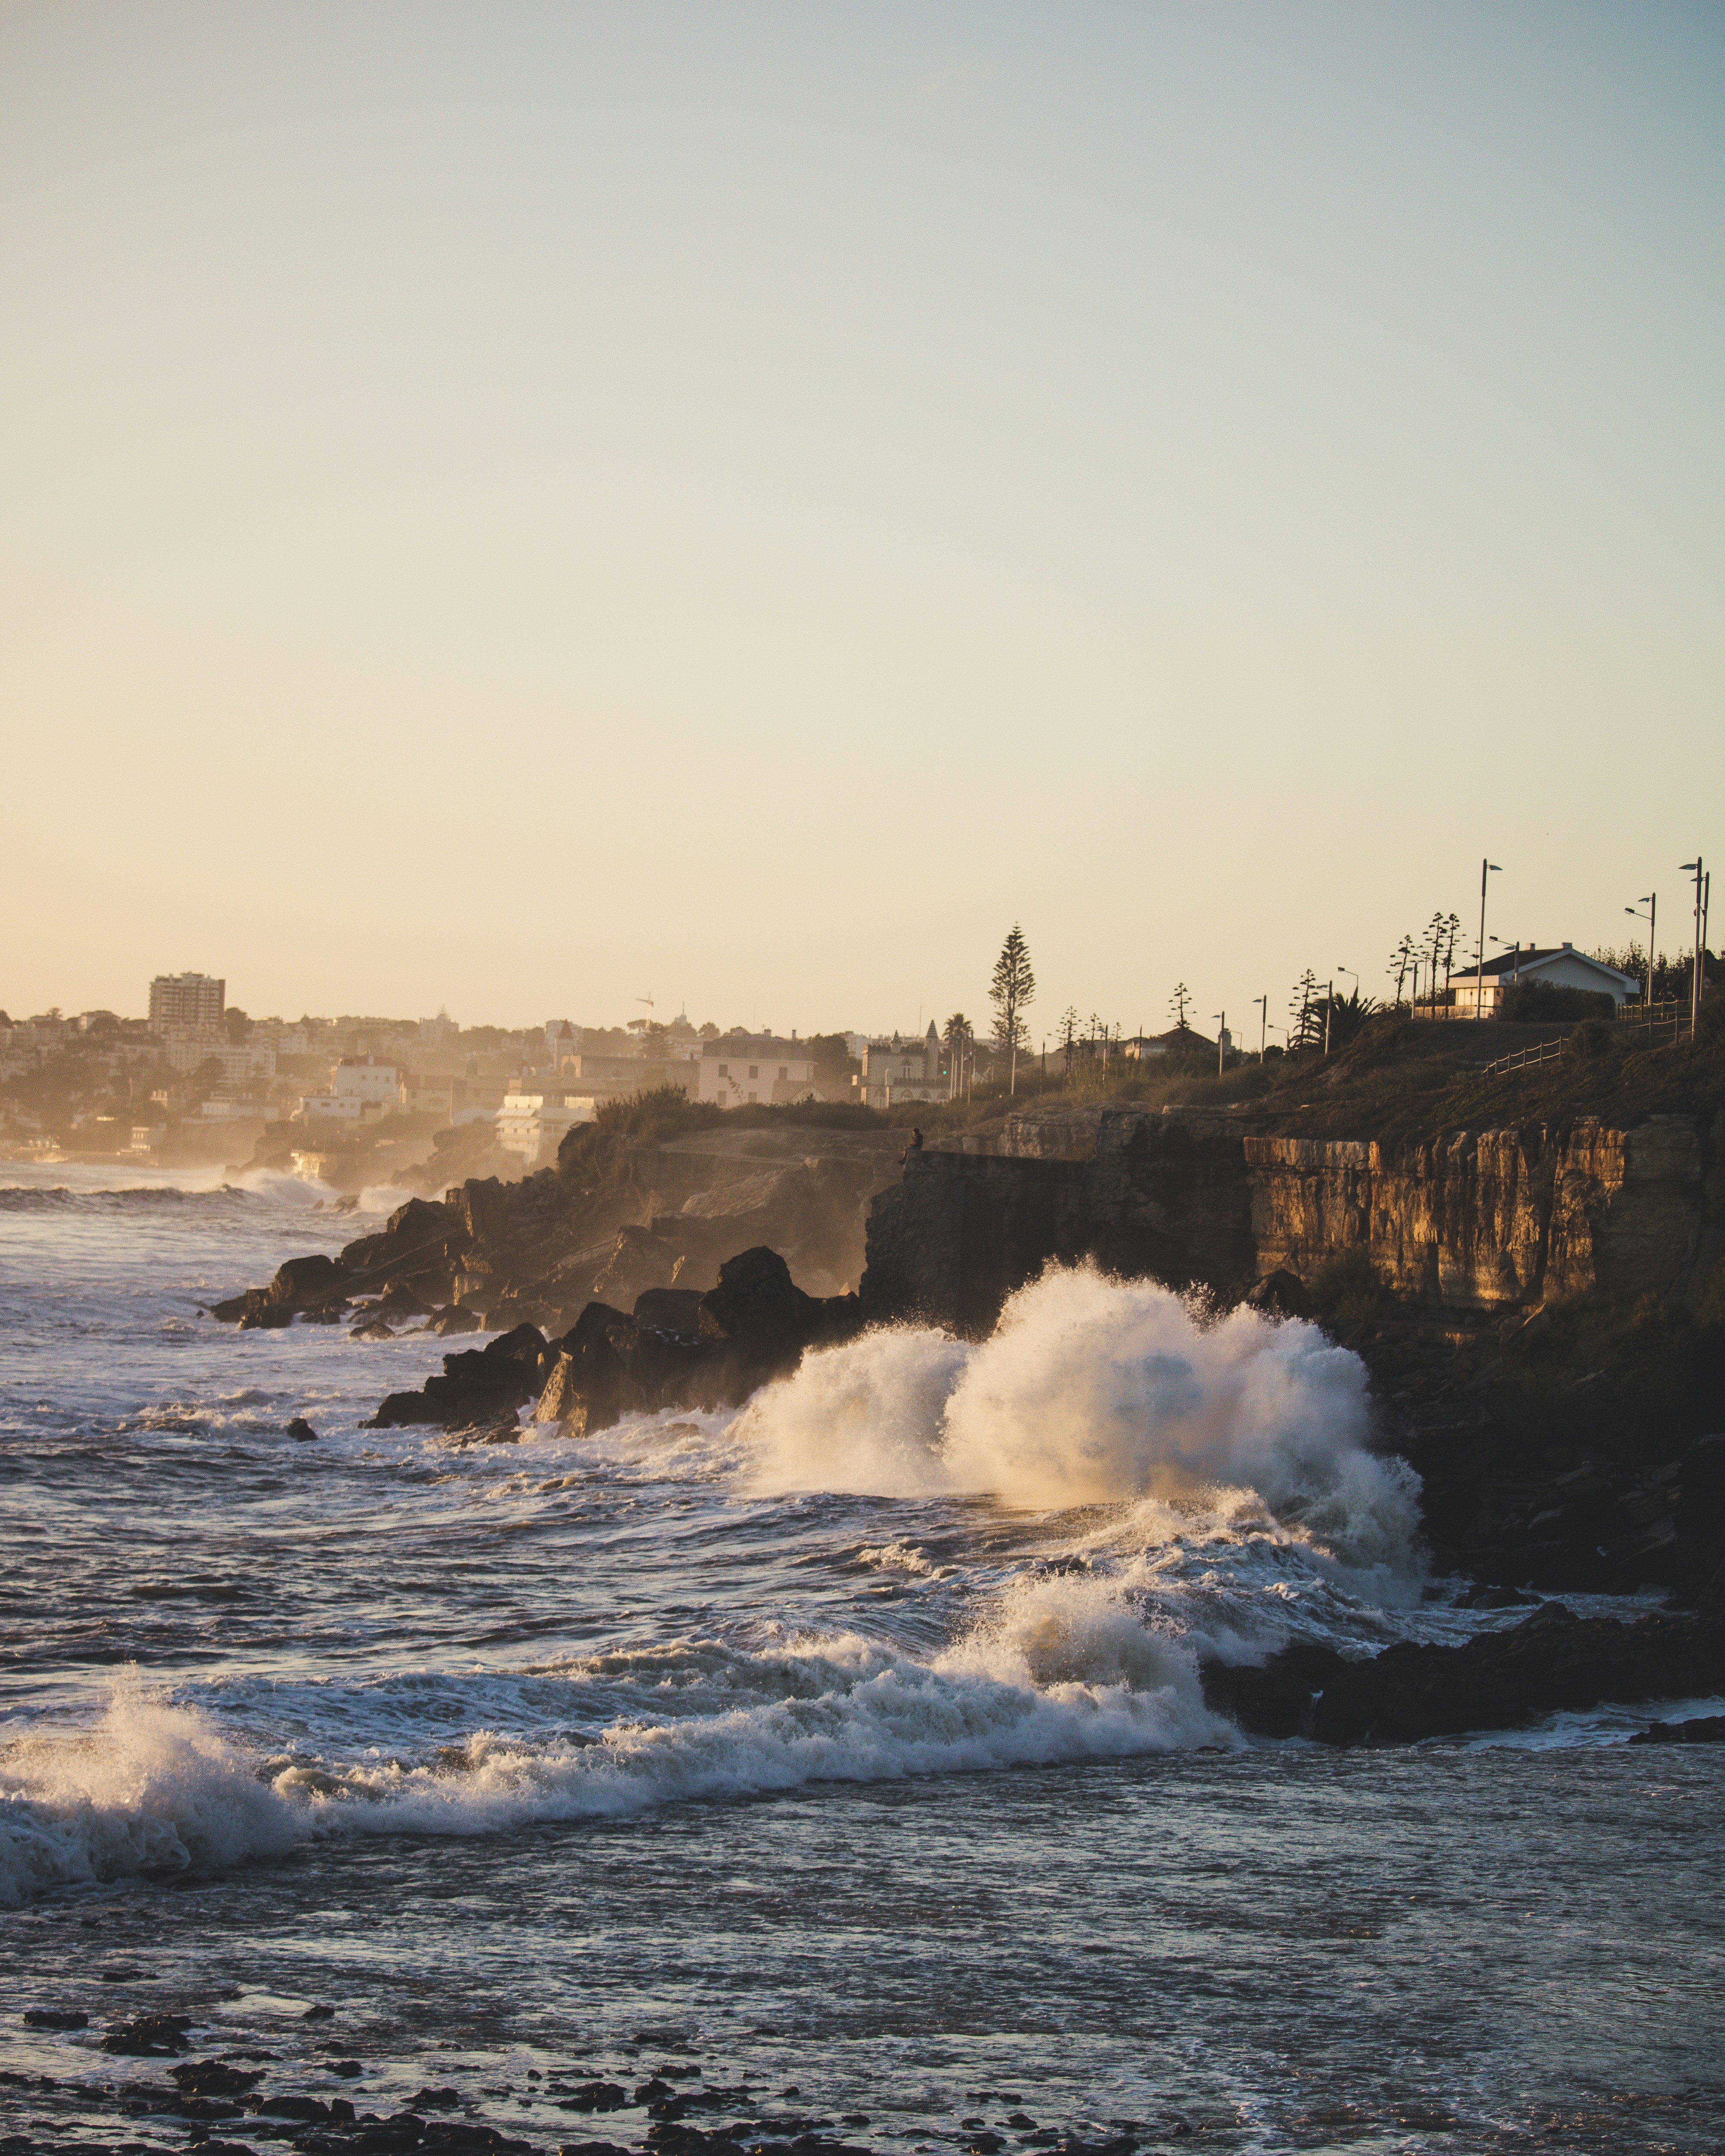 I was walking through the city of Cascais and found this beach. I decide to wait for the sunset to take this photo, the sea was rough.